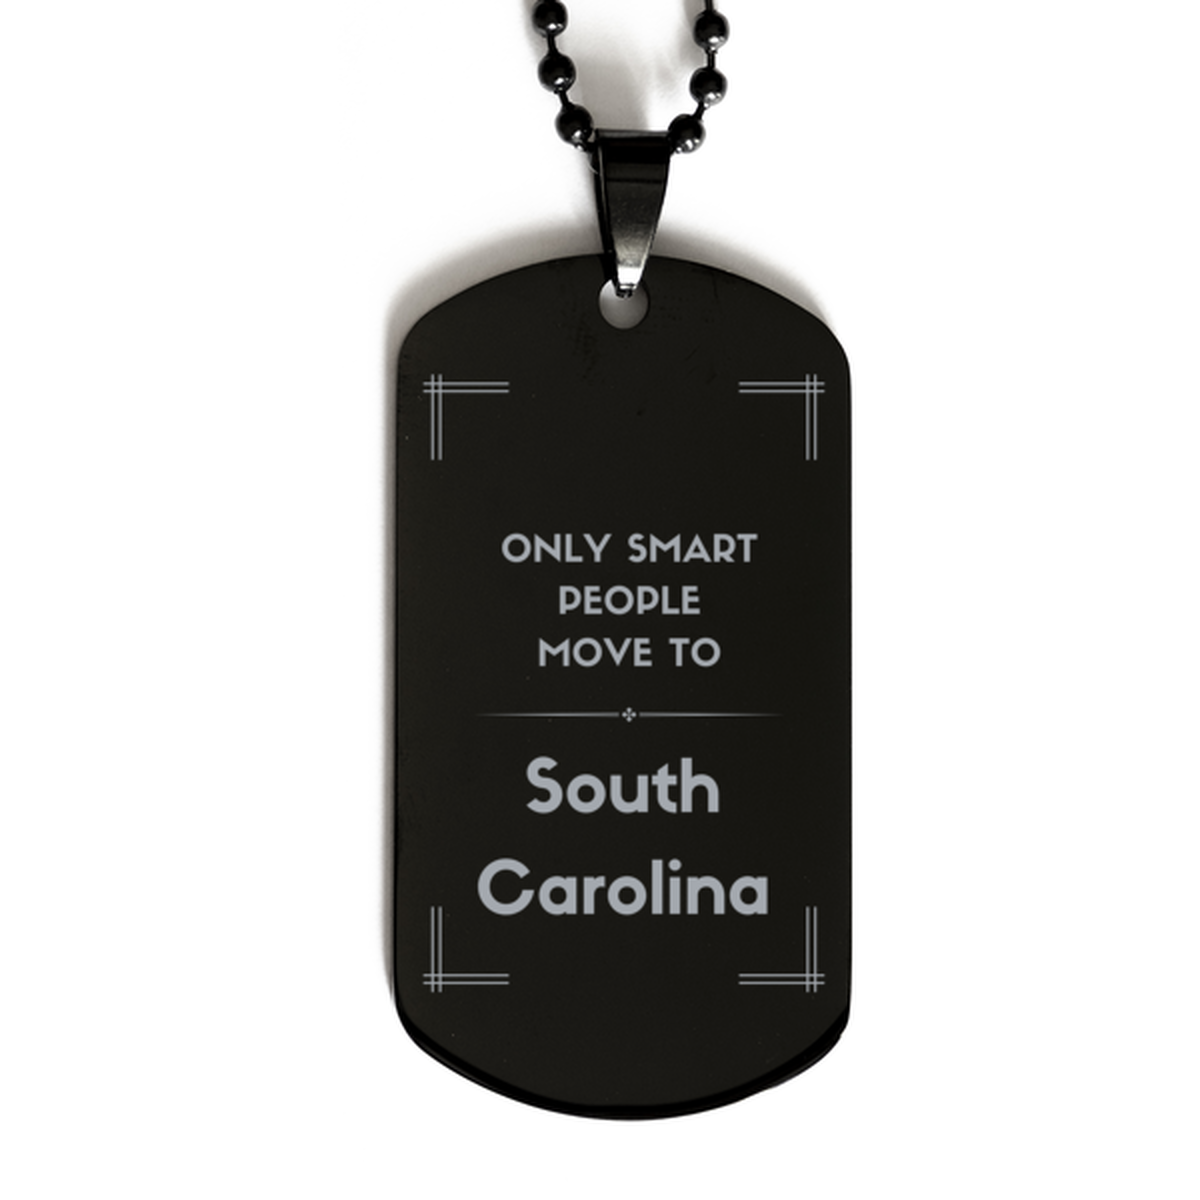 Only smart people move to South Carolina Black Dog Tag, Gag Gifts For South Carolina, Move to South Carolina Gifts for Friends Coworker Funny Saying Quote